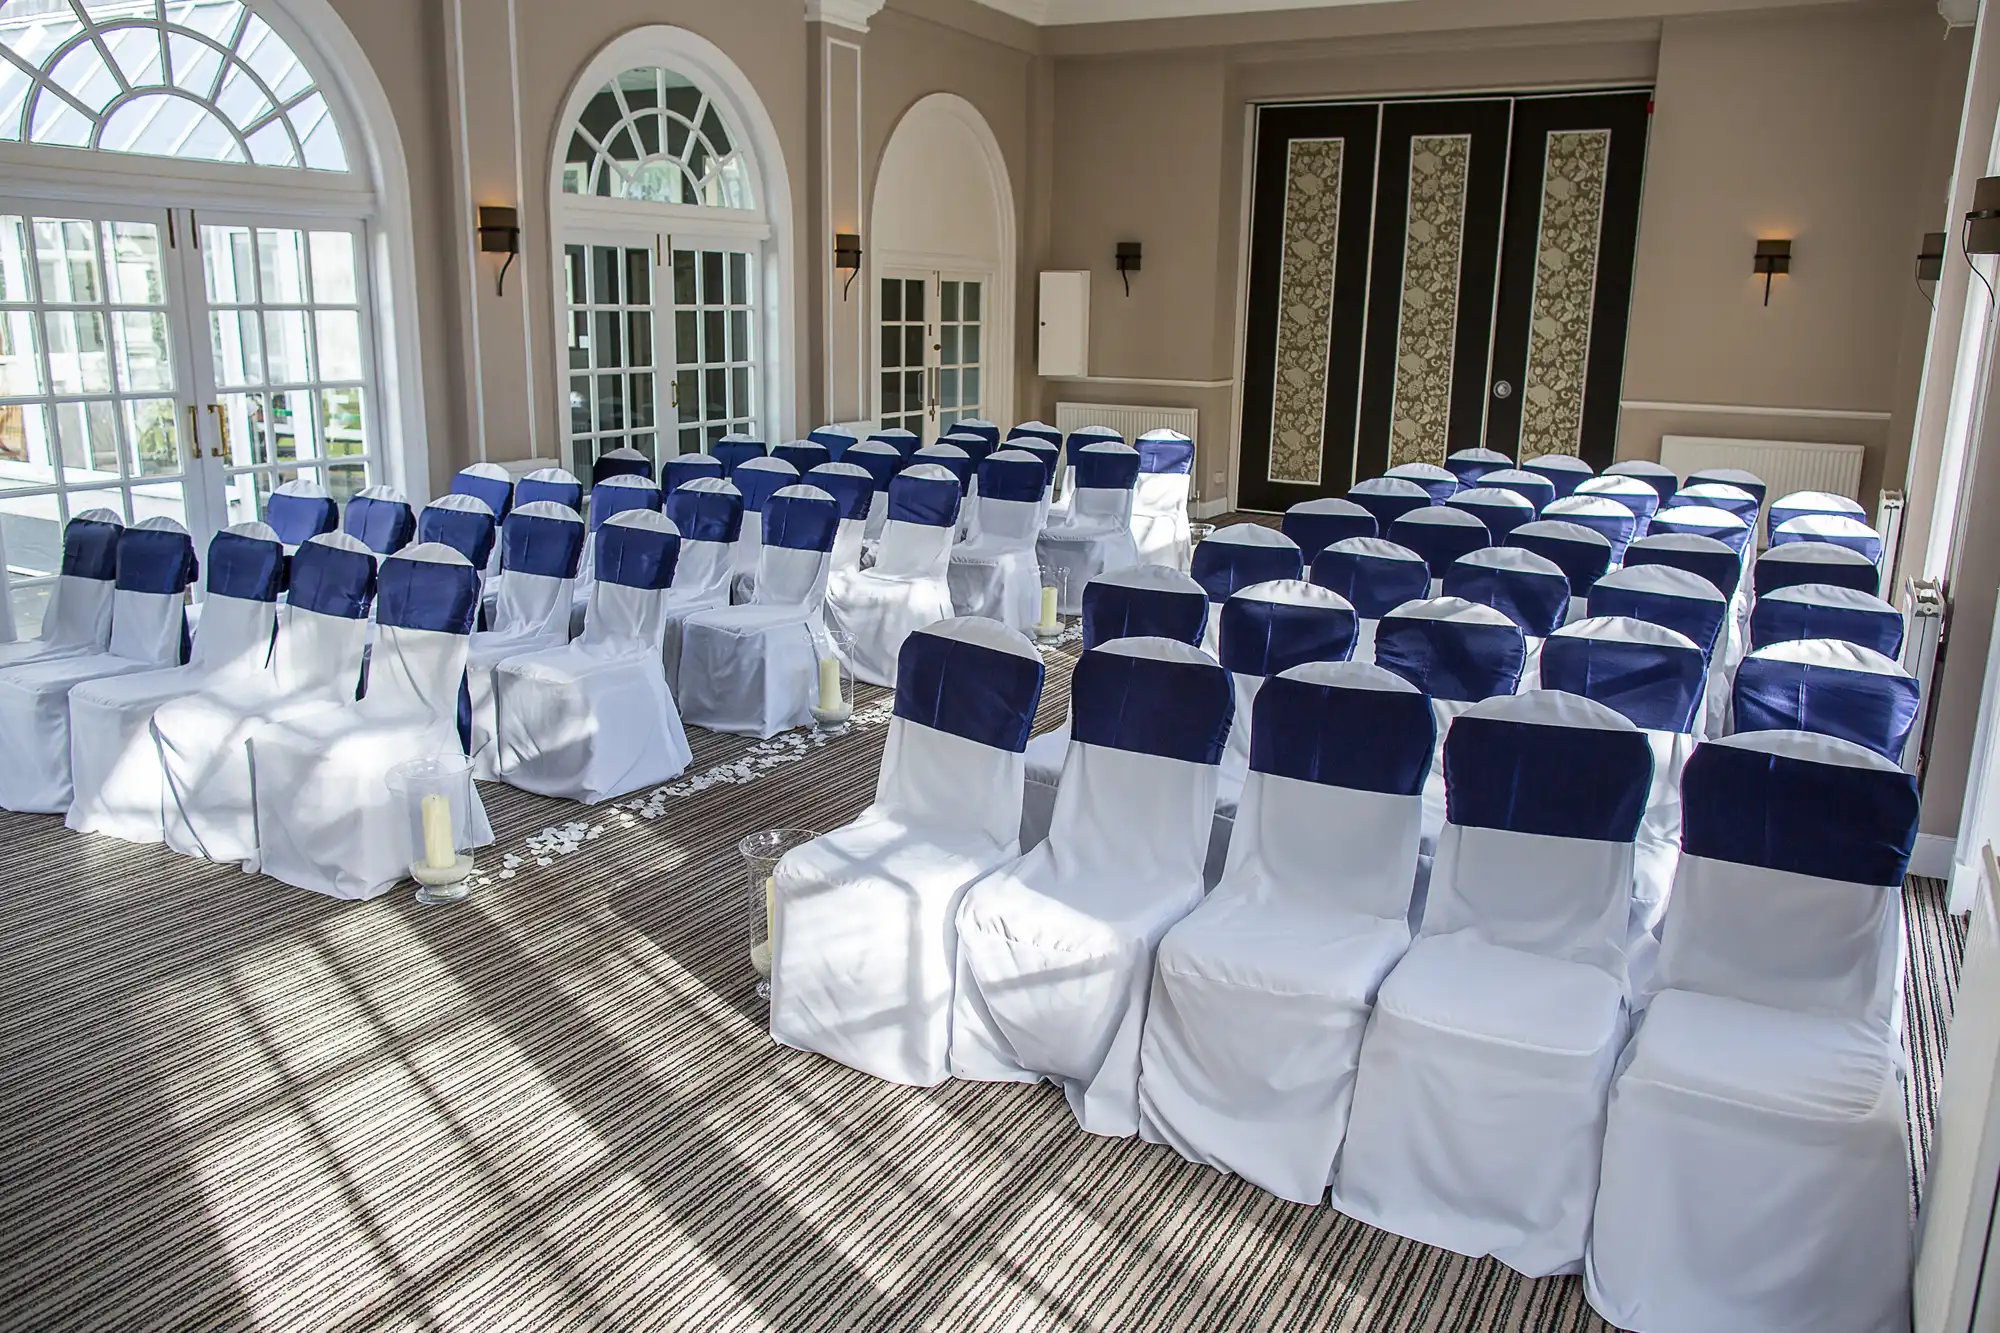 Elegant event venue with rows of white chairs covered in blue sashes, arranged on a striped carpet, facing large arched windows.